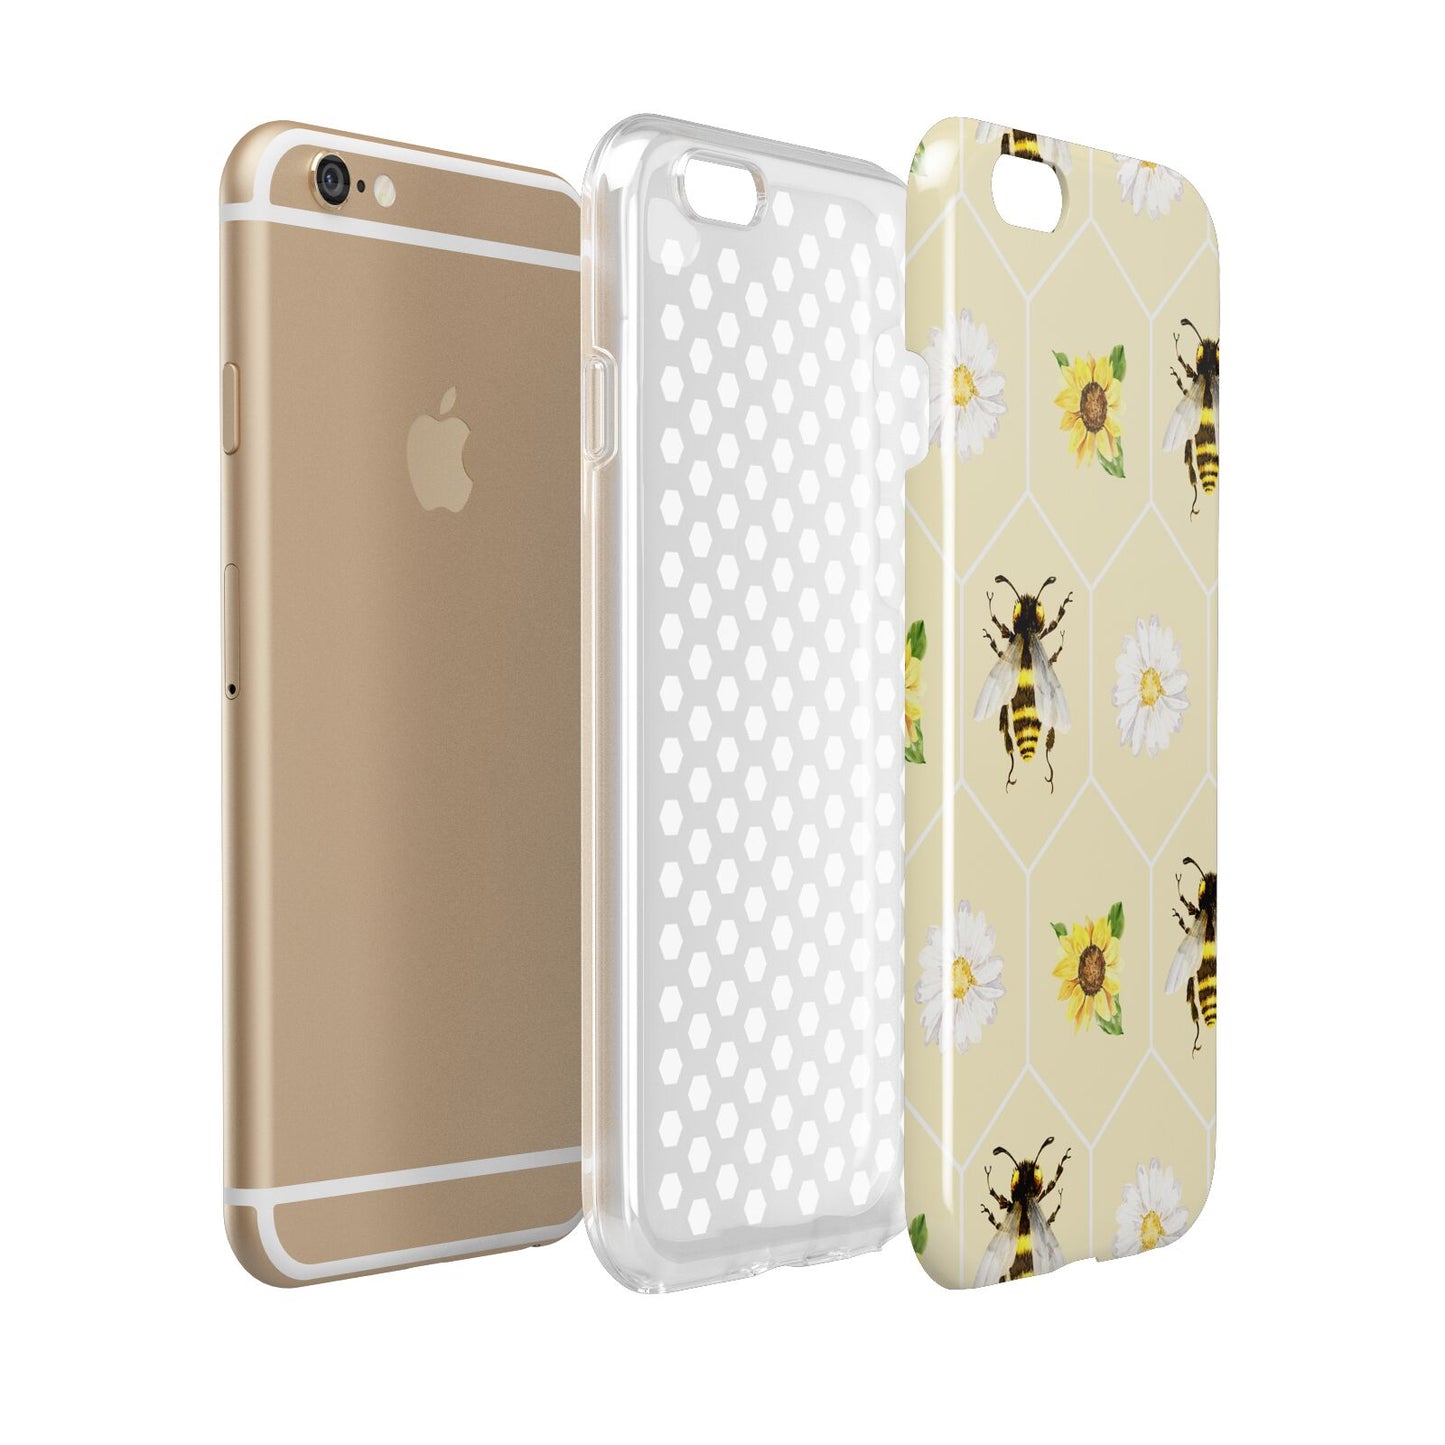 Daisies Bees and Sunflowers Apple iPhone 6 3D Tough Case Expanded view